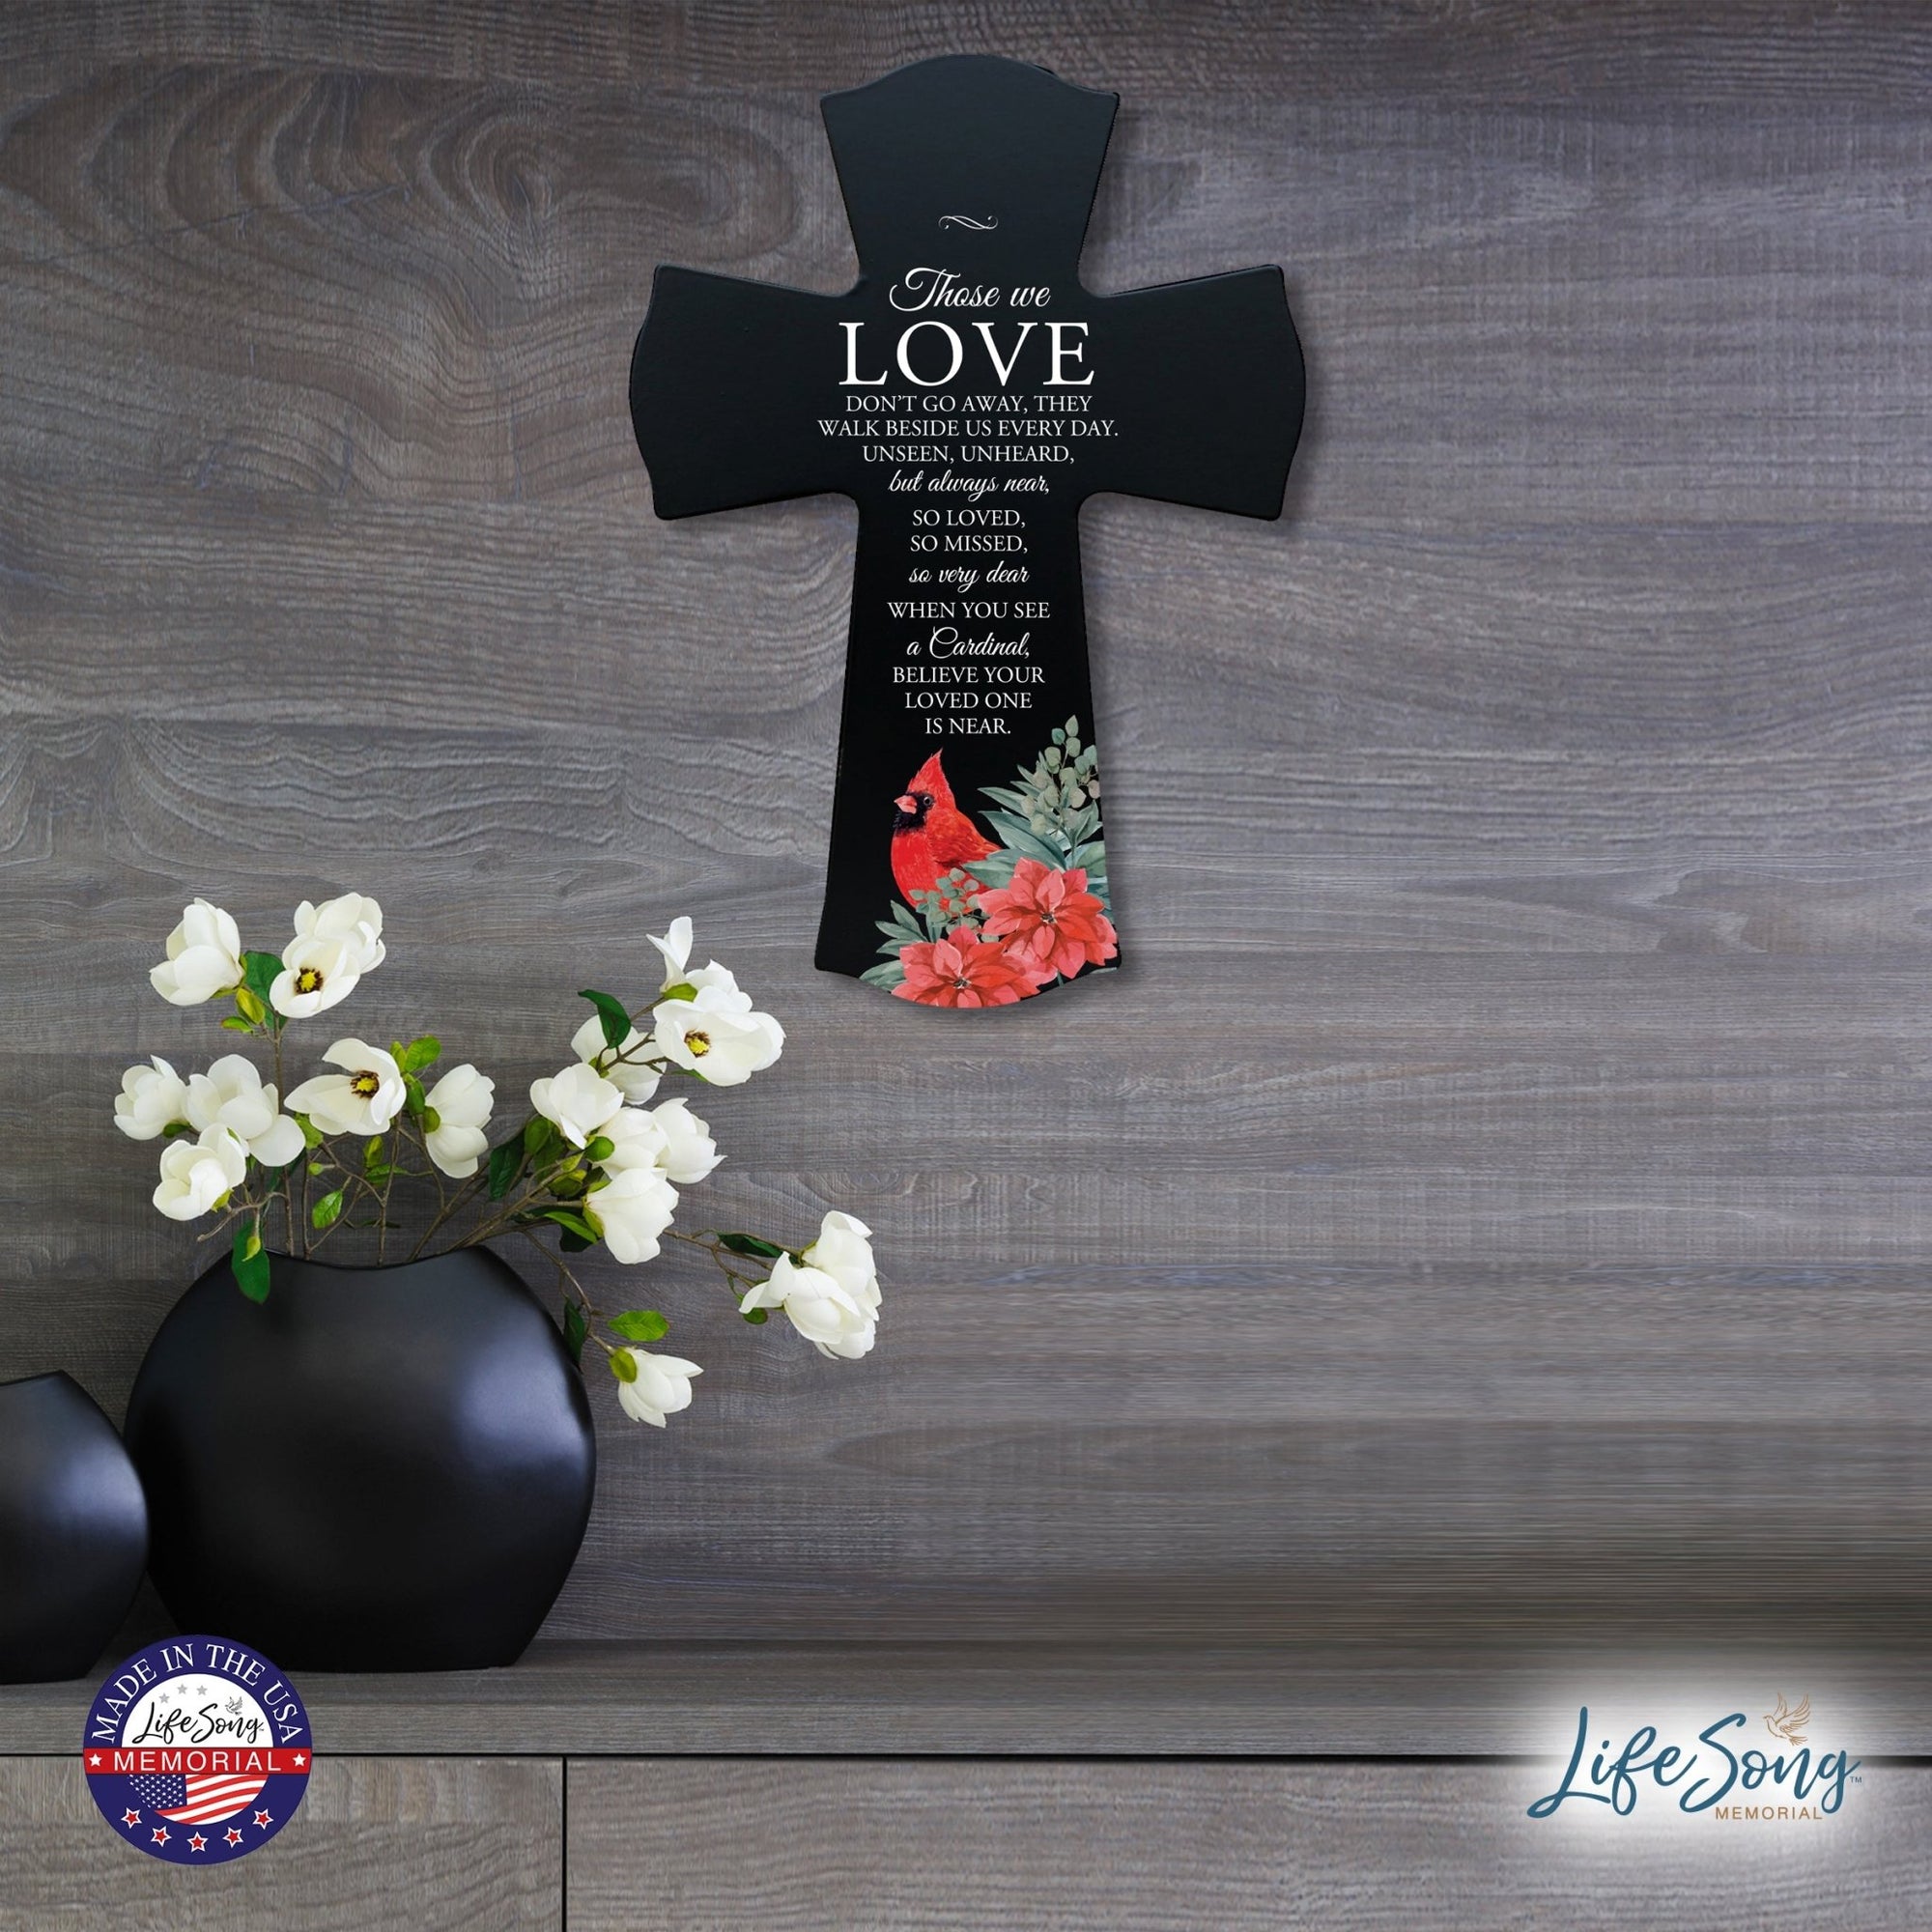 Memorial Wooden Wall Cross 8x11 Cardinal Bereavement Gift for Loss on Loved One – Believe Your Loved One Is Near - LifeSong Milestones